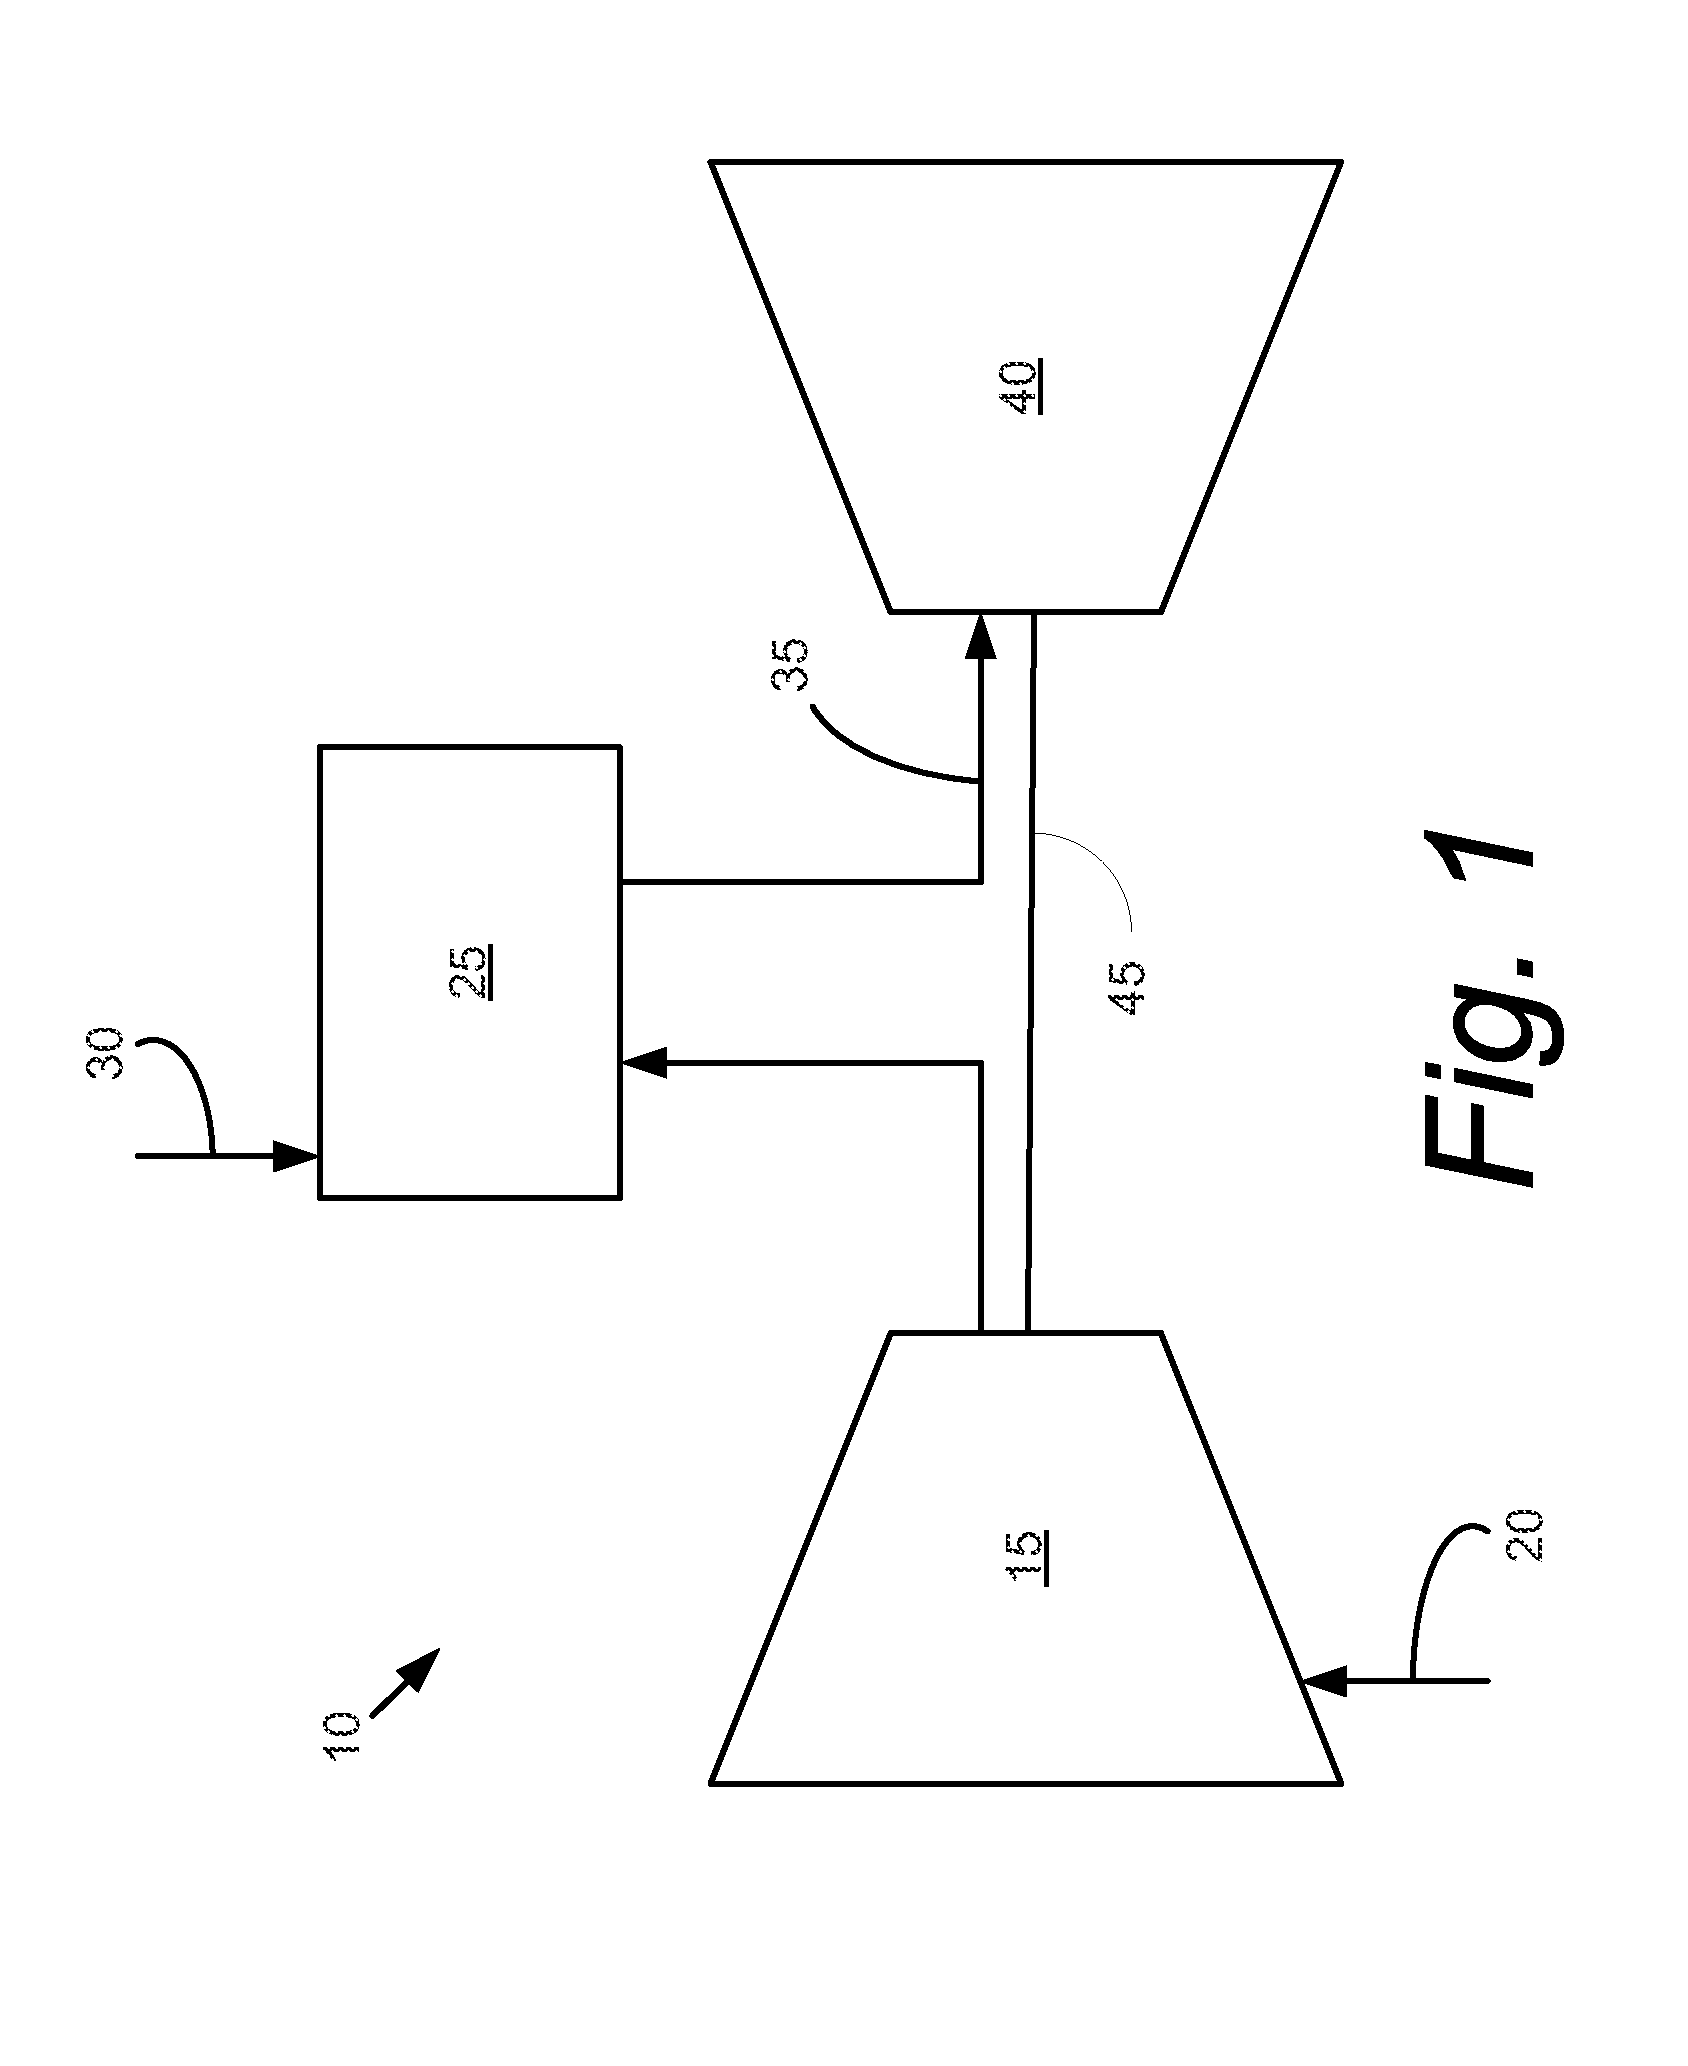 Gas Turbine Engine Generator System with Torsional Damping Coupling